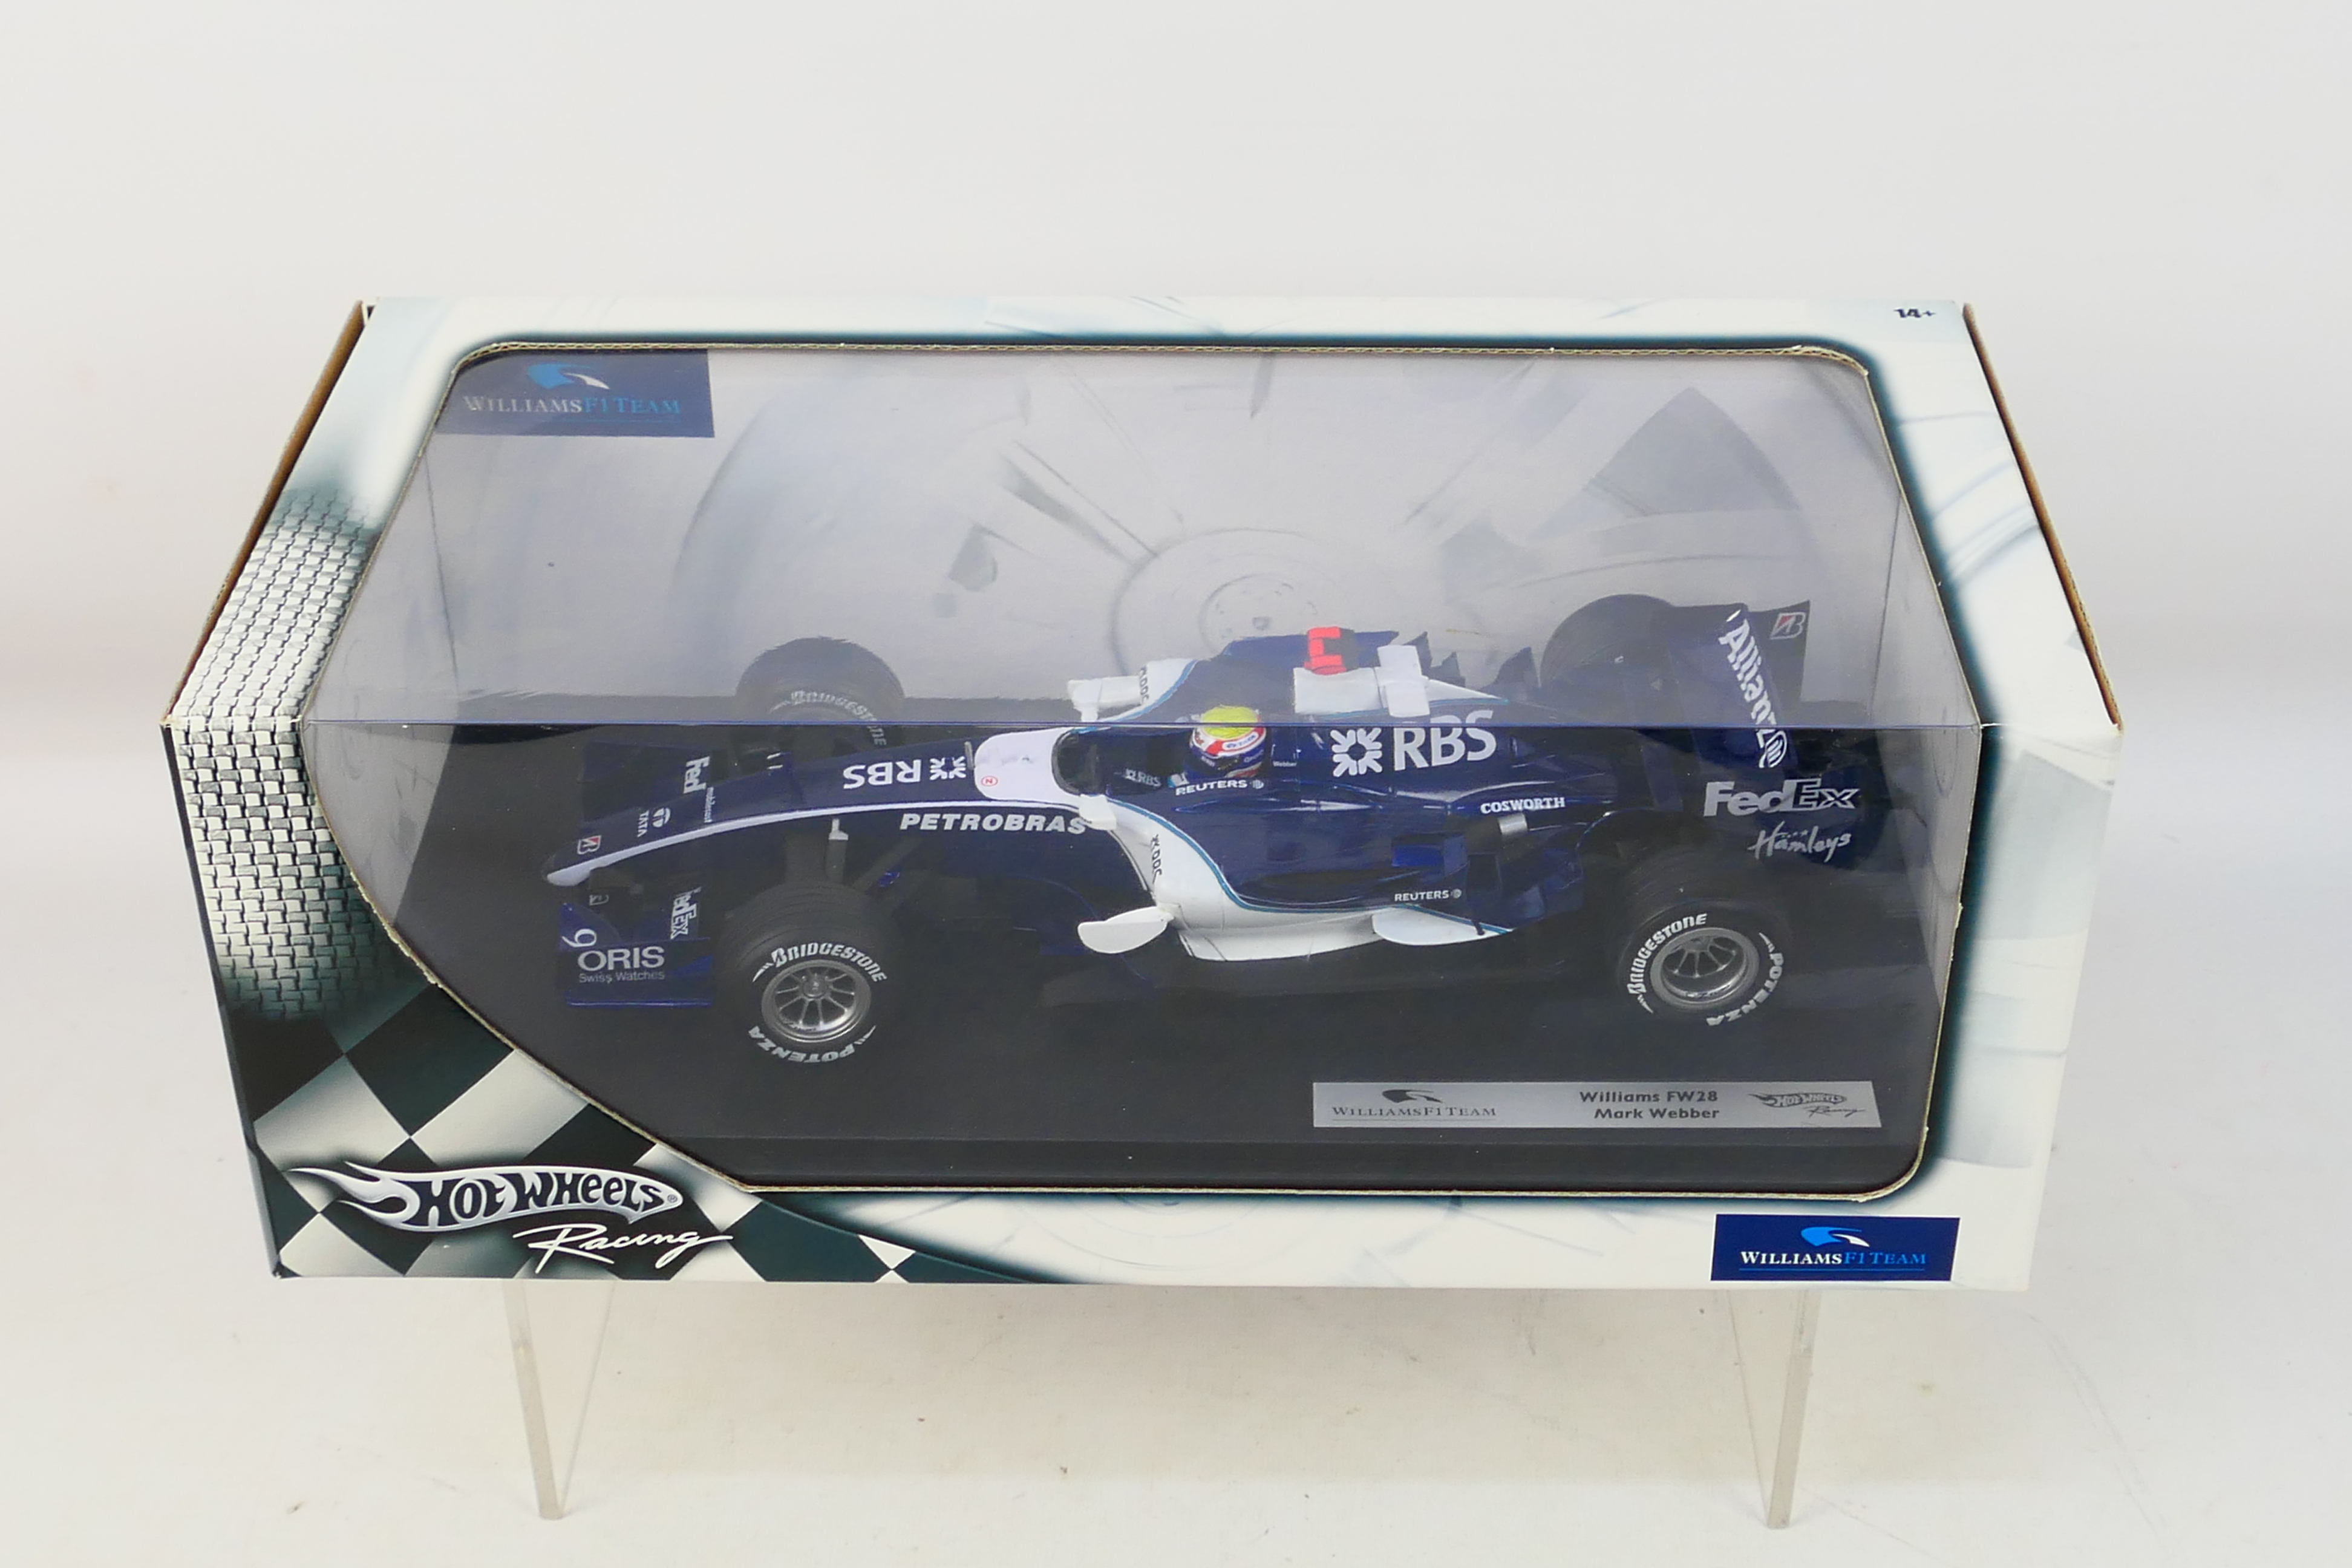 Hot Wheels - A boxed 1:18 scale Williams FW28 Mark Webber 2006 F1 car # 27084312041. - Image 3 of 3